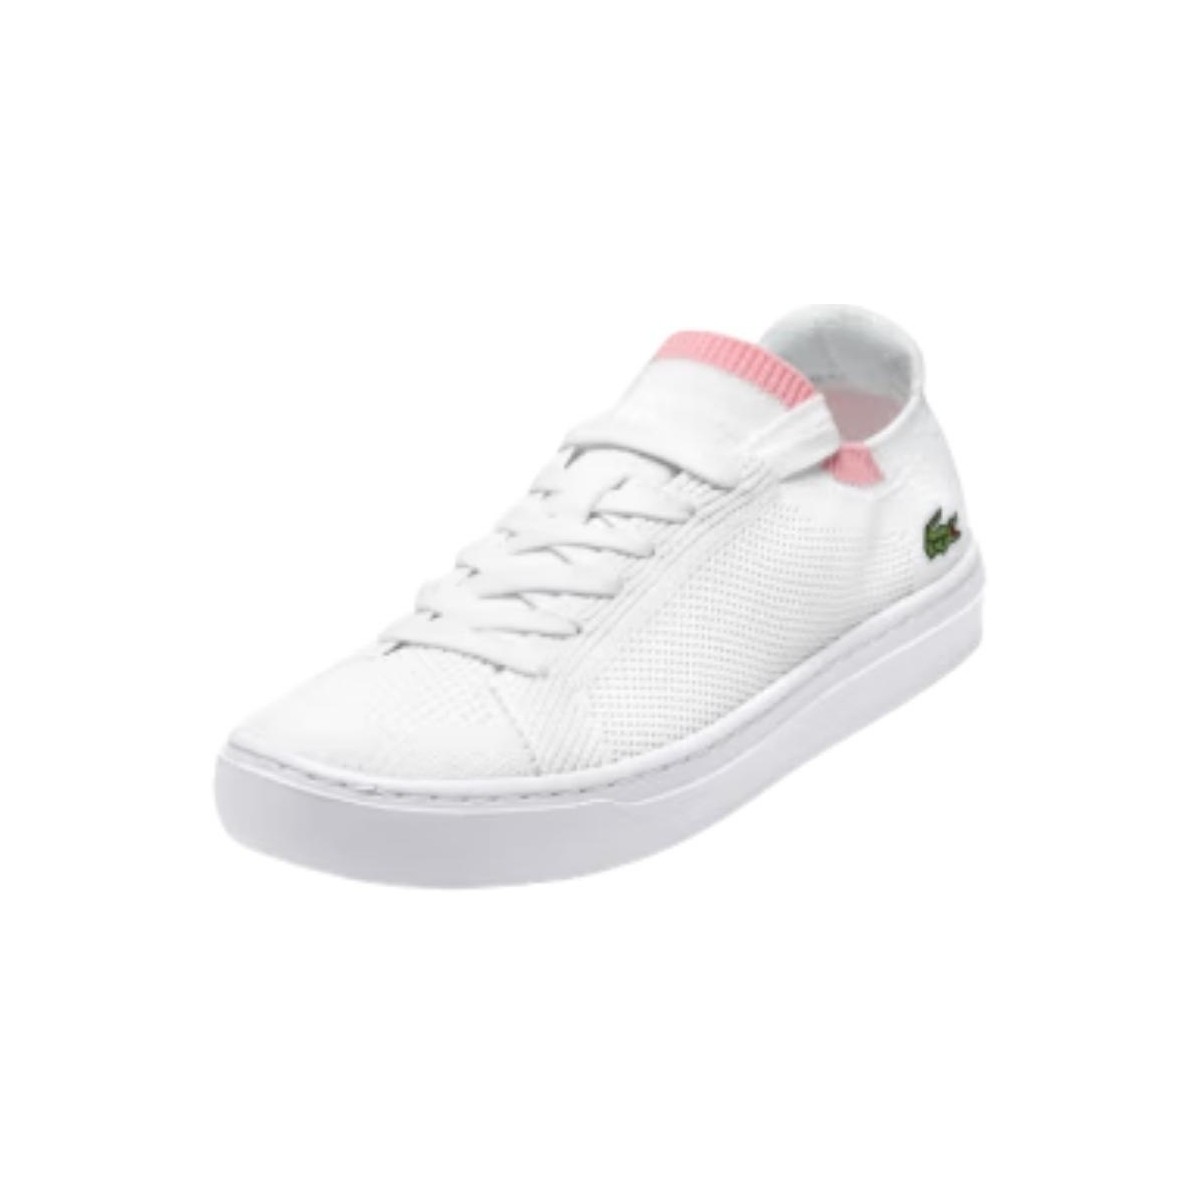 Baskets Femme Ref 56943 1Y9 Blanc Chaussures Lacoste en coloris Blanc Femme Chaussures Baskets Baskets basses 